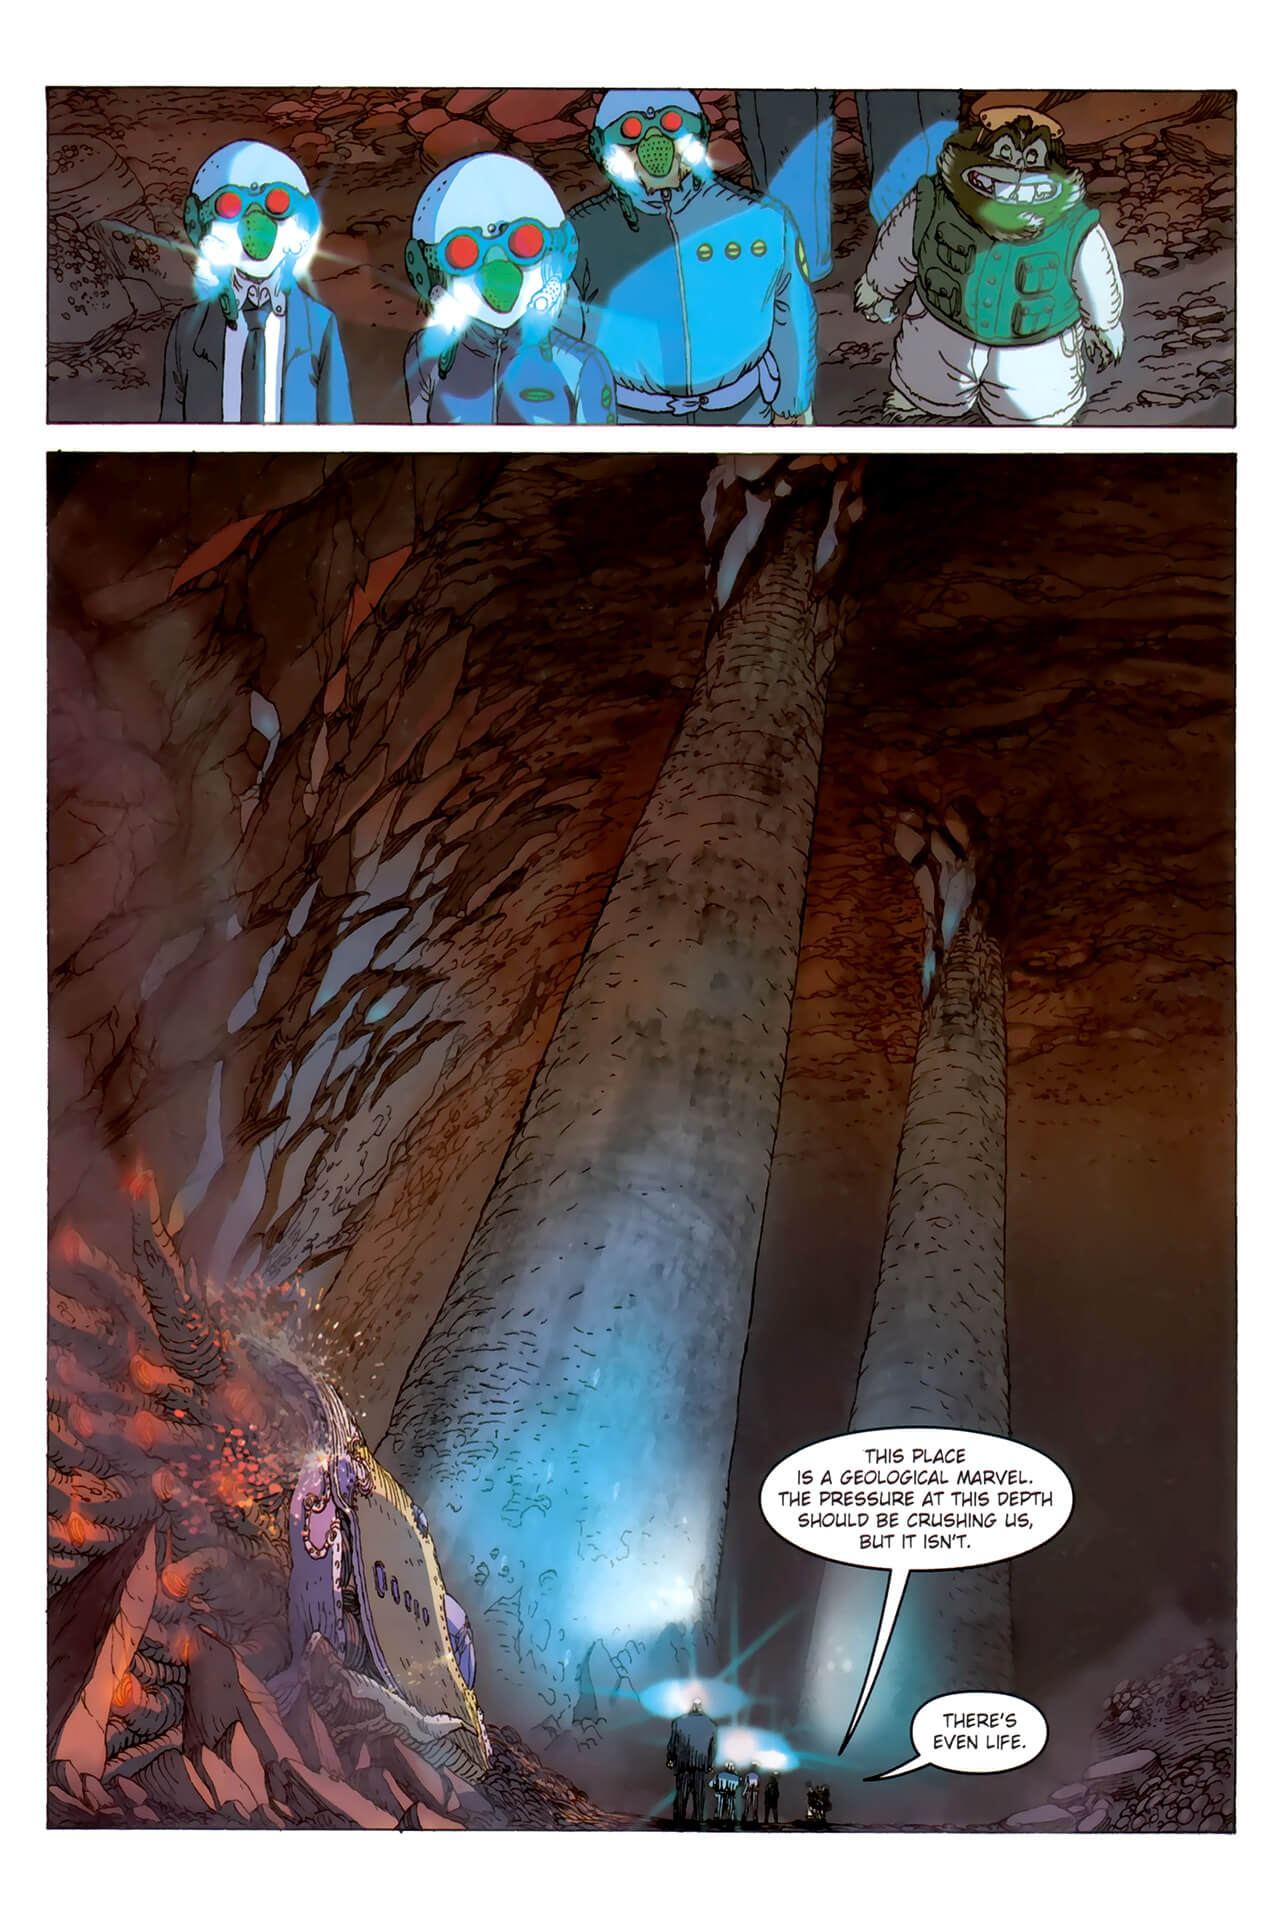 page 98 of artemis fowl the arctic incident graphic novel